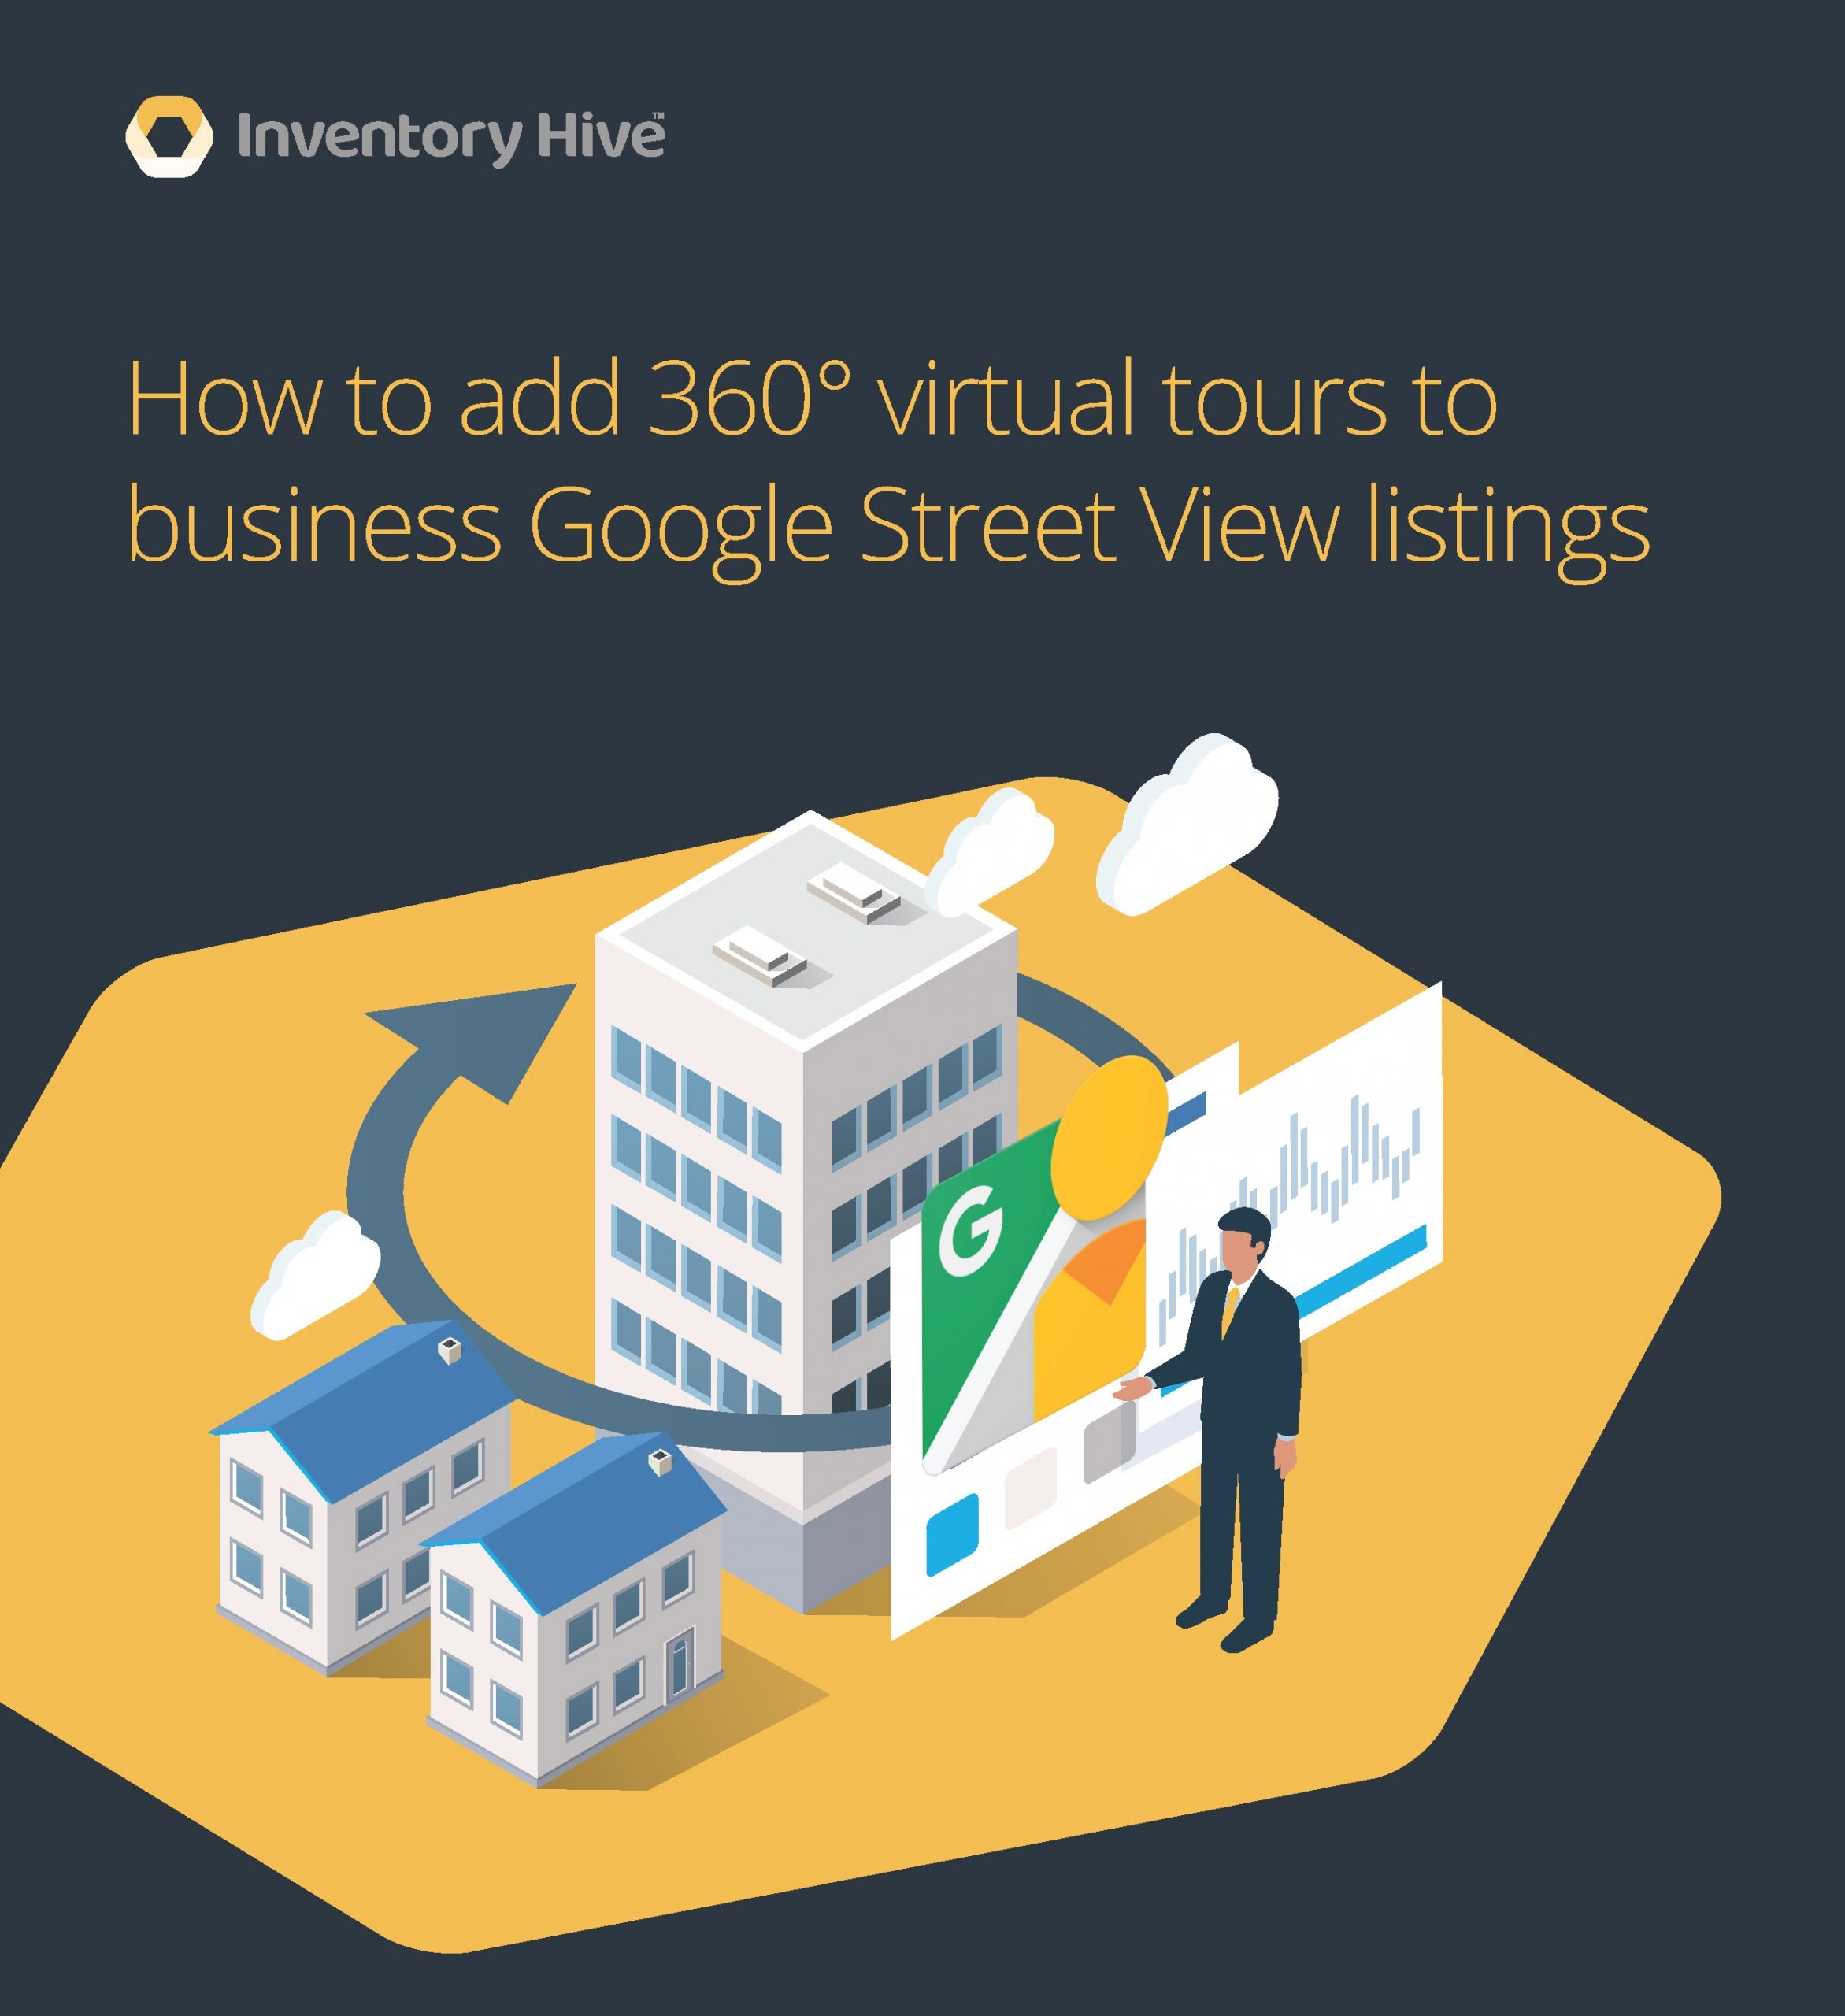 How to add 360° virtual tours to business Google Street View listings – Guide